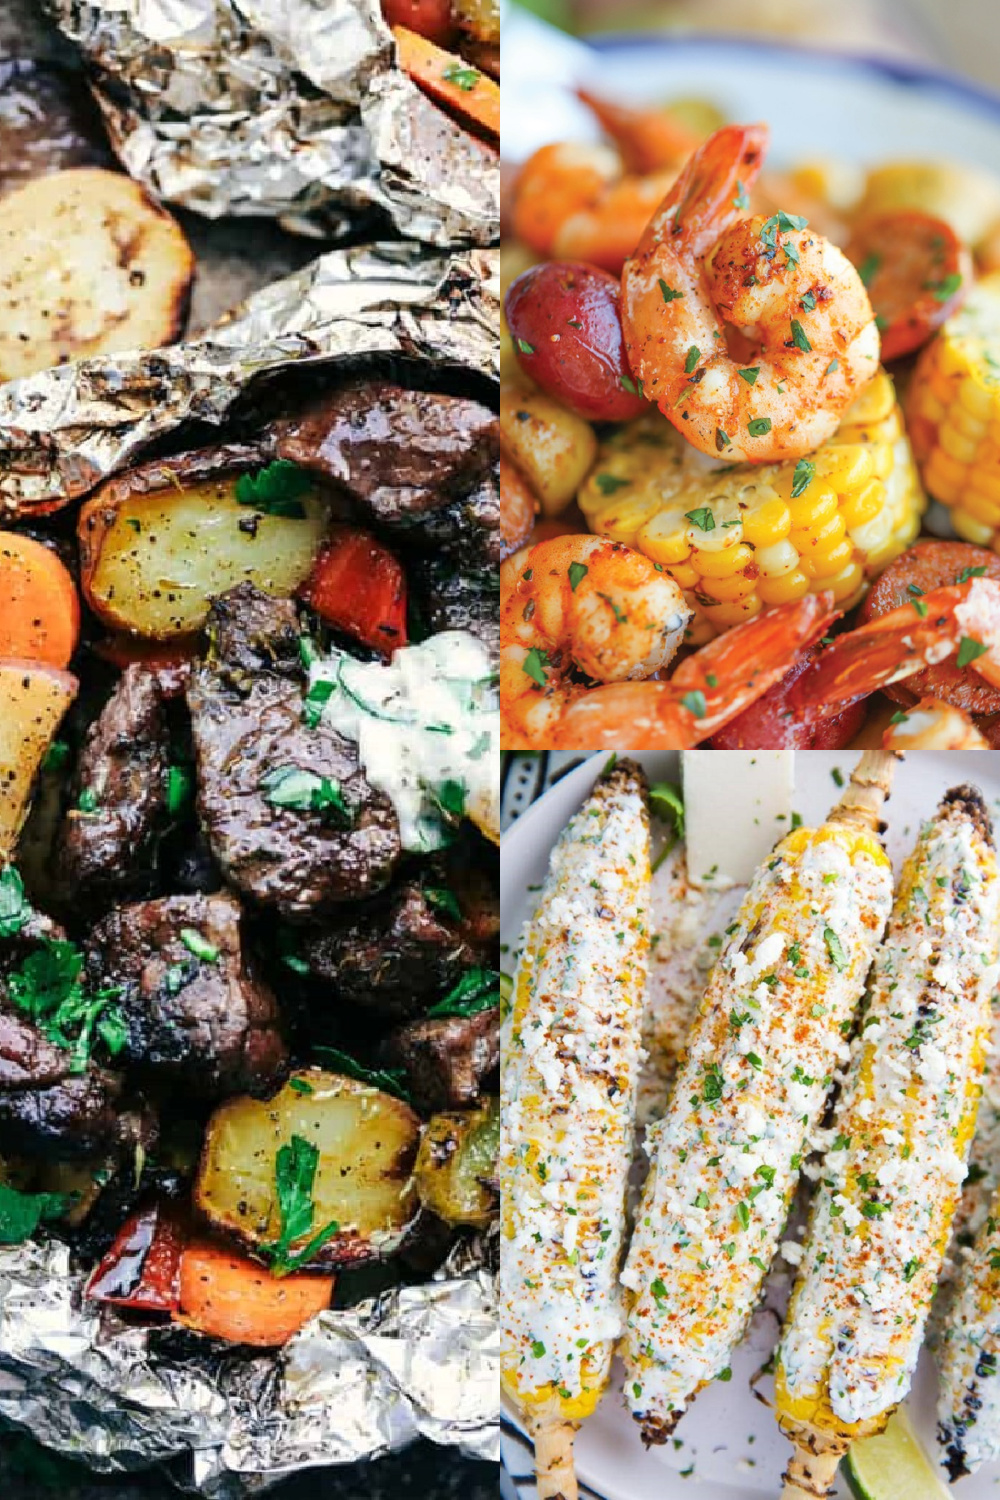 10 Delicious Foil Packet Dinners for Busy Weeknights